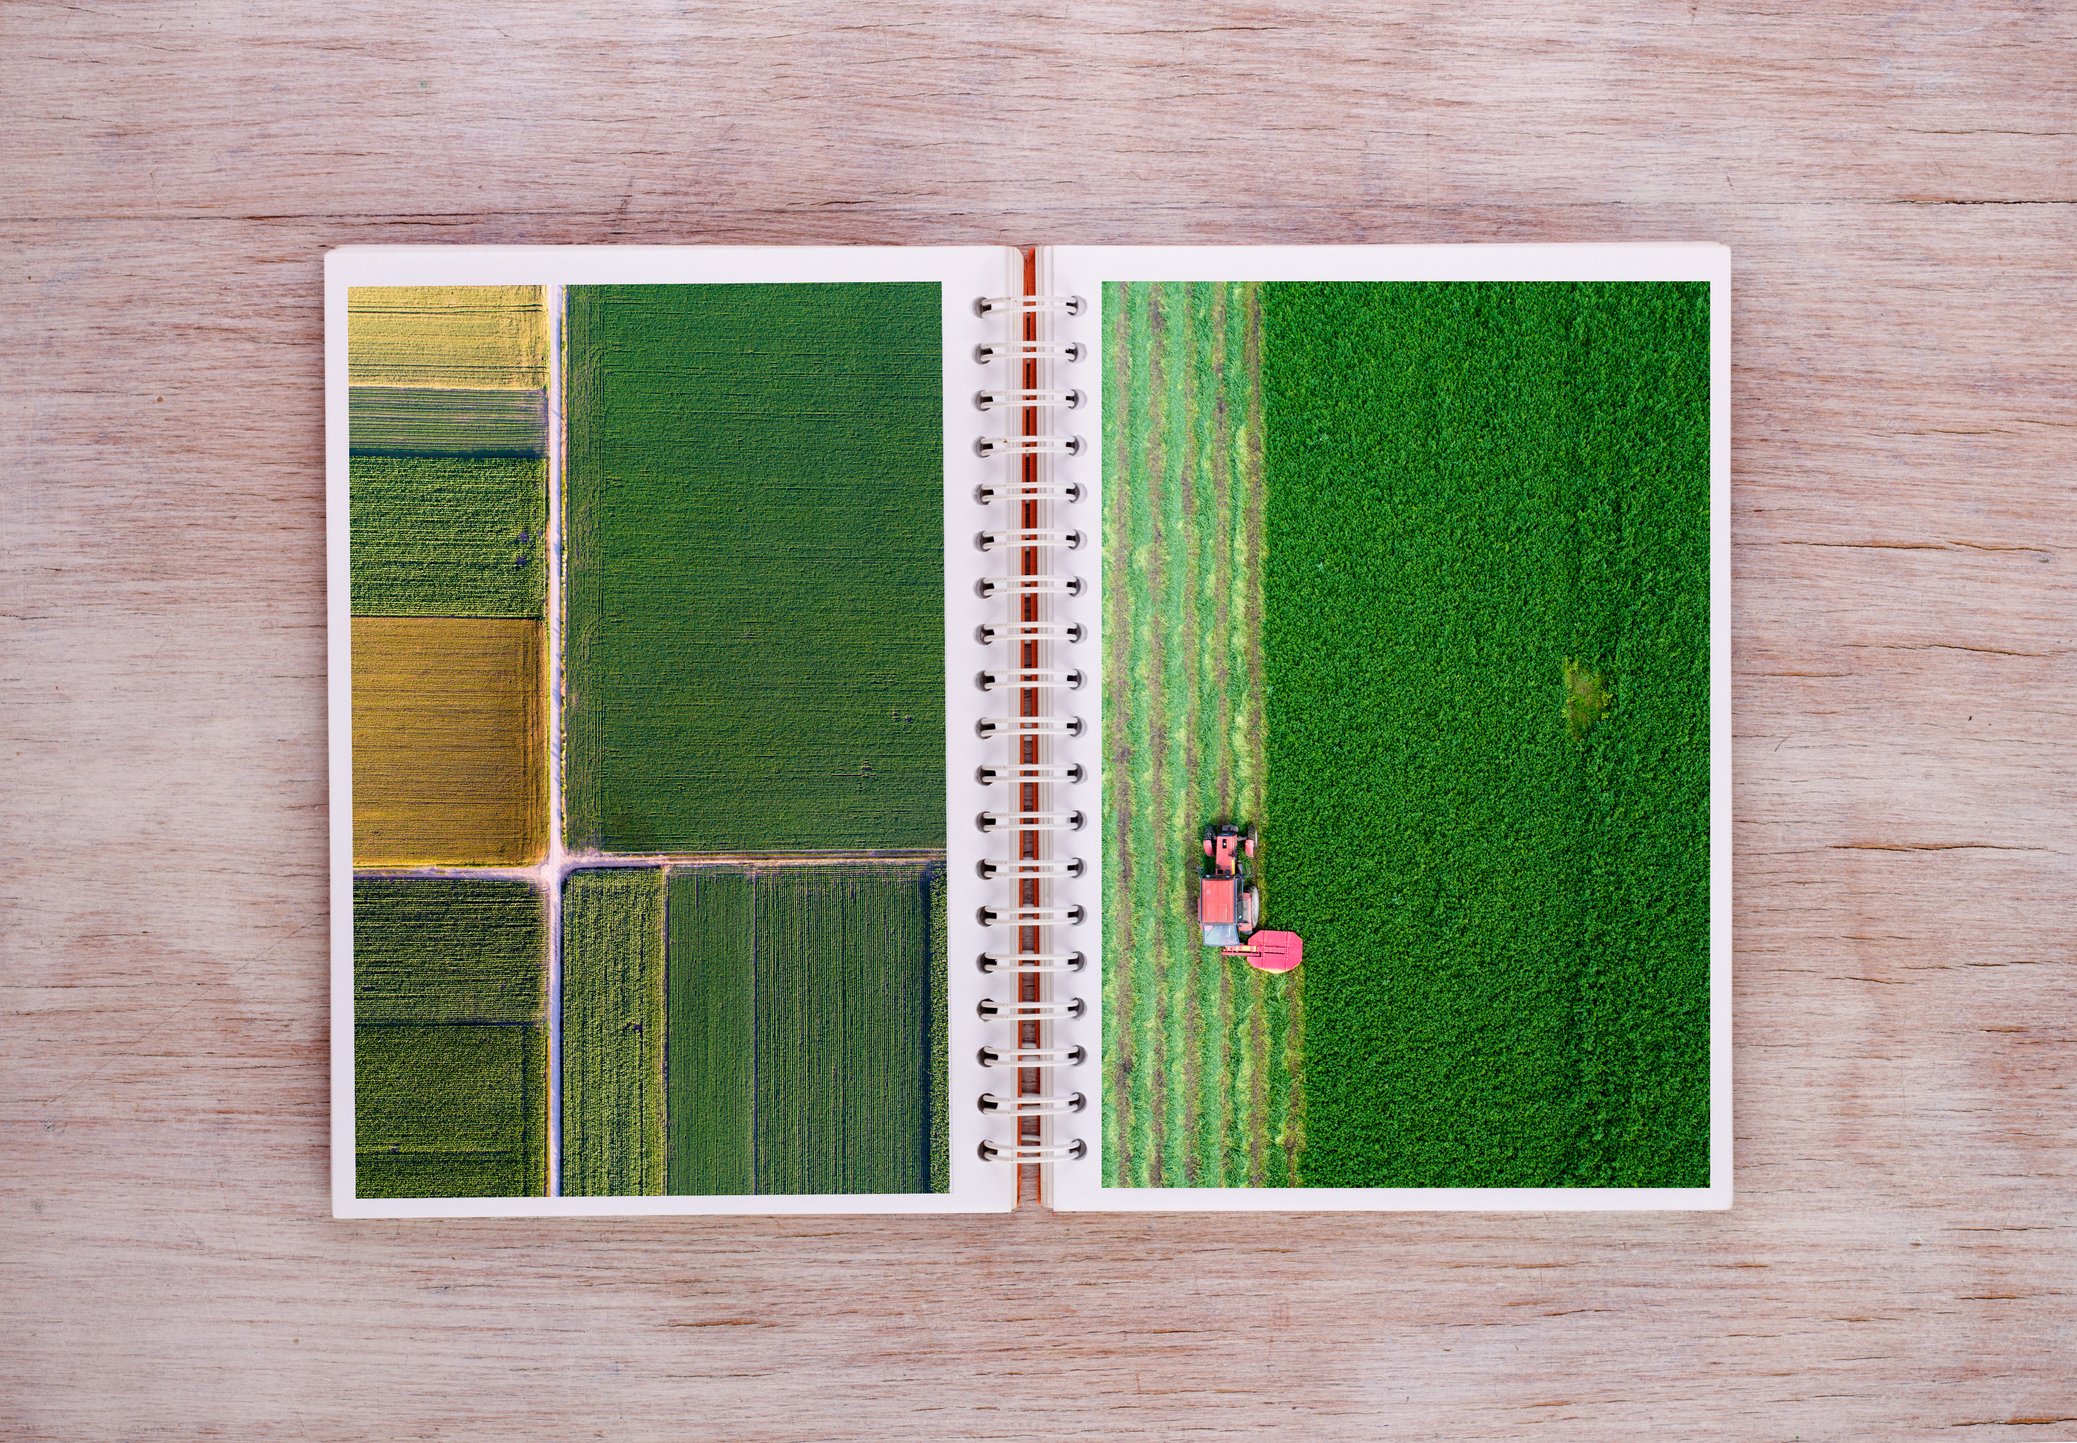 An open book on a desk with a tractor and green fields